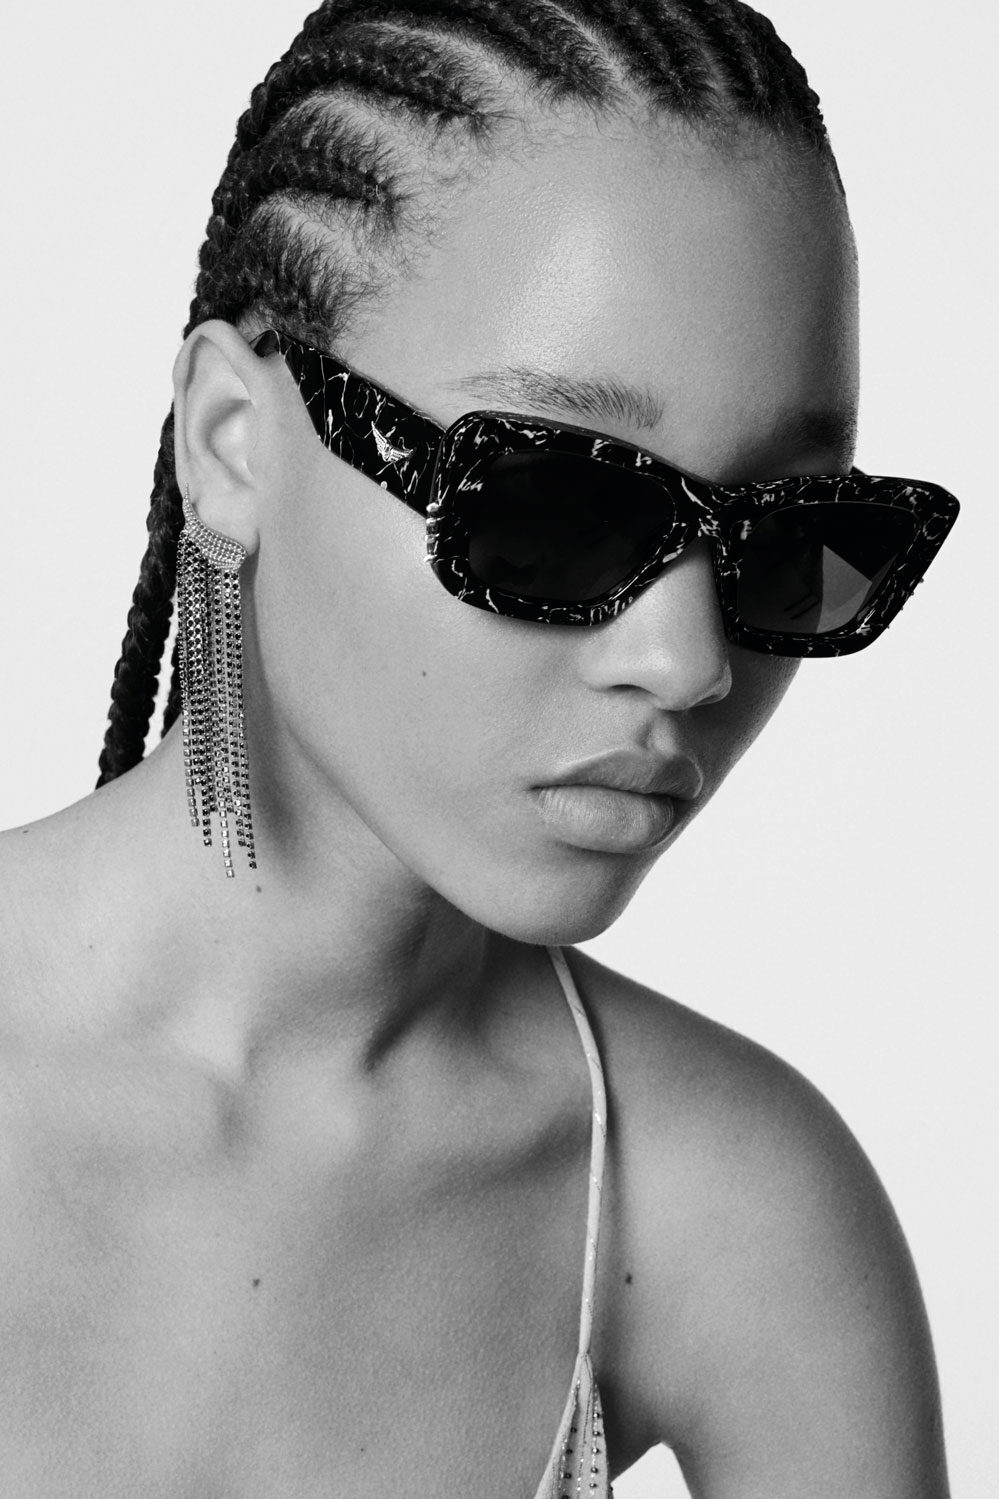 The De Rigo group and Zadig&Voltaire renew their eyewear brand licensing agreement